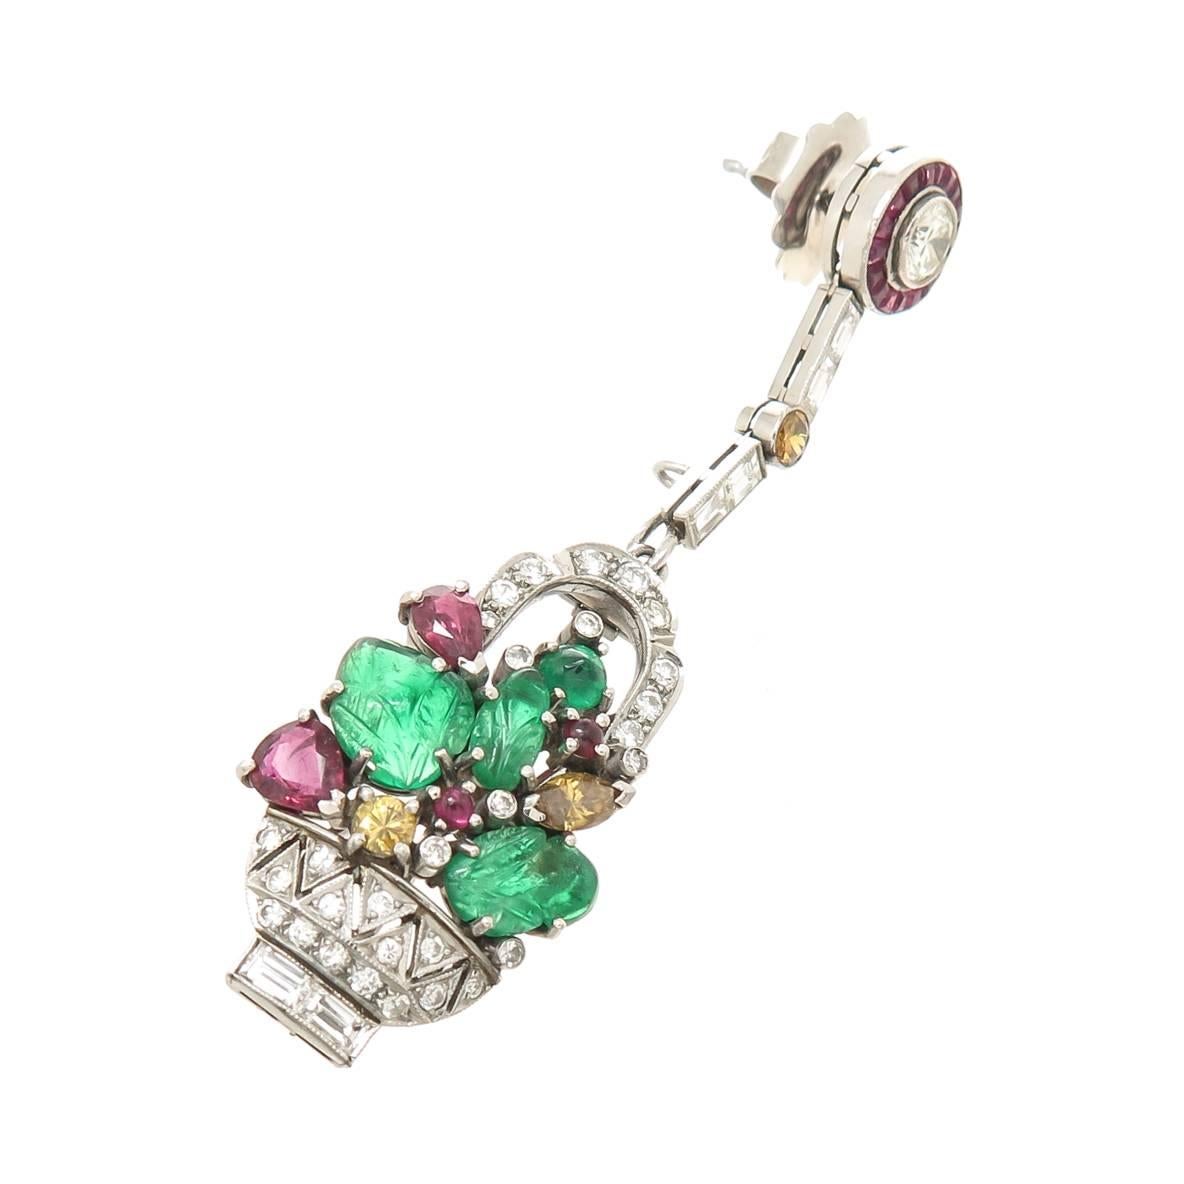 Circa 1950 Platinum Tutti Frutti, Fruit Basket convertible Dress Clip, Earrings, set with Round, Baguette and Fancy Color Diamonds and further set with Carved and Cabochon Emeralds, Cabochon and Pear shape Rubies. Diamond Total = 2.50 Carats.